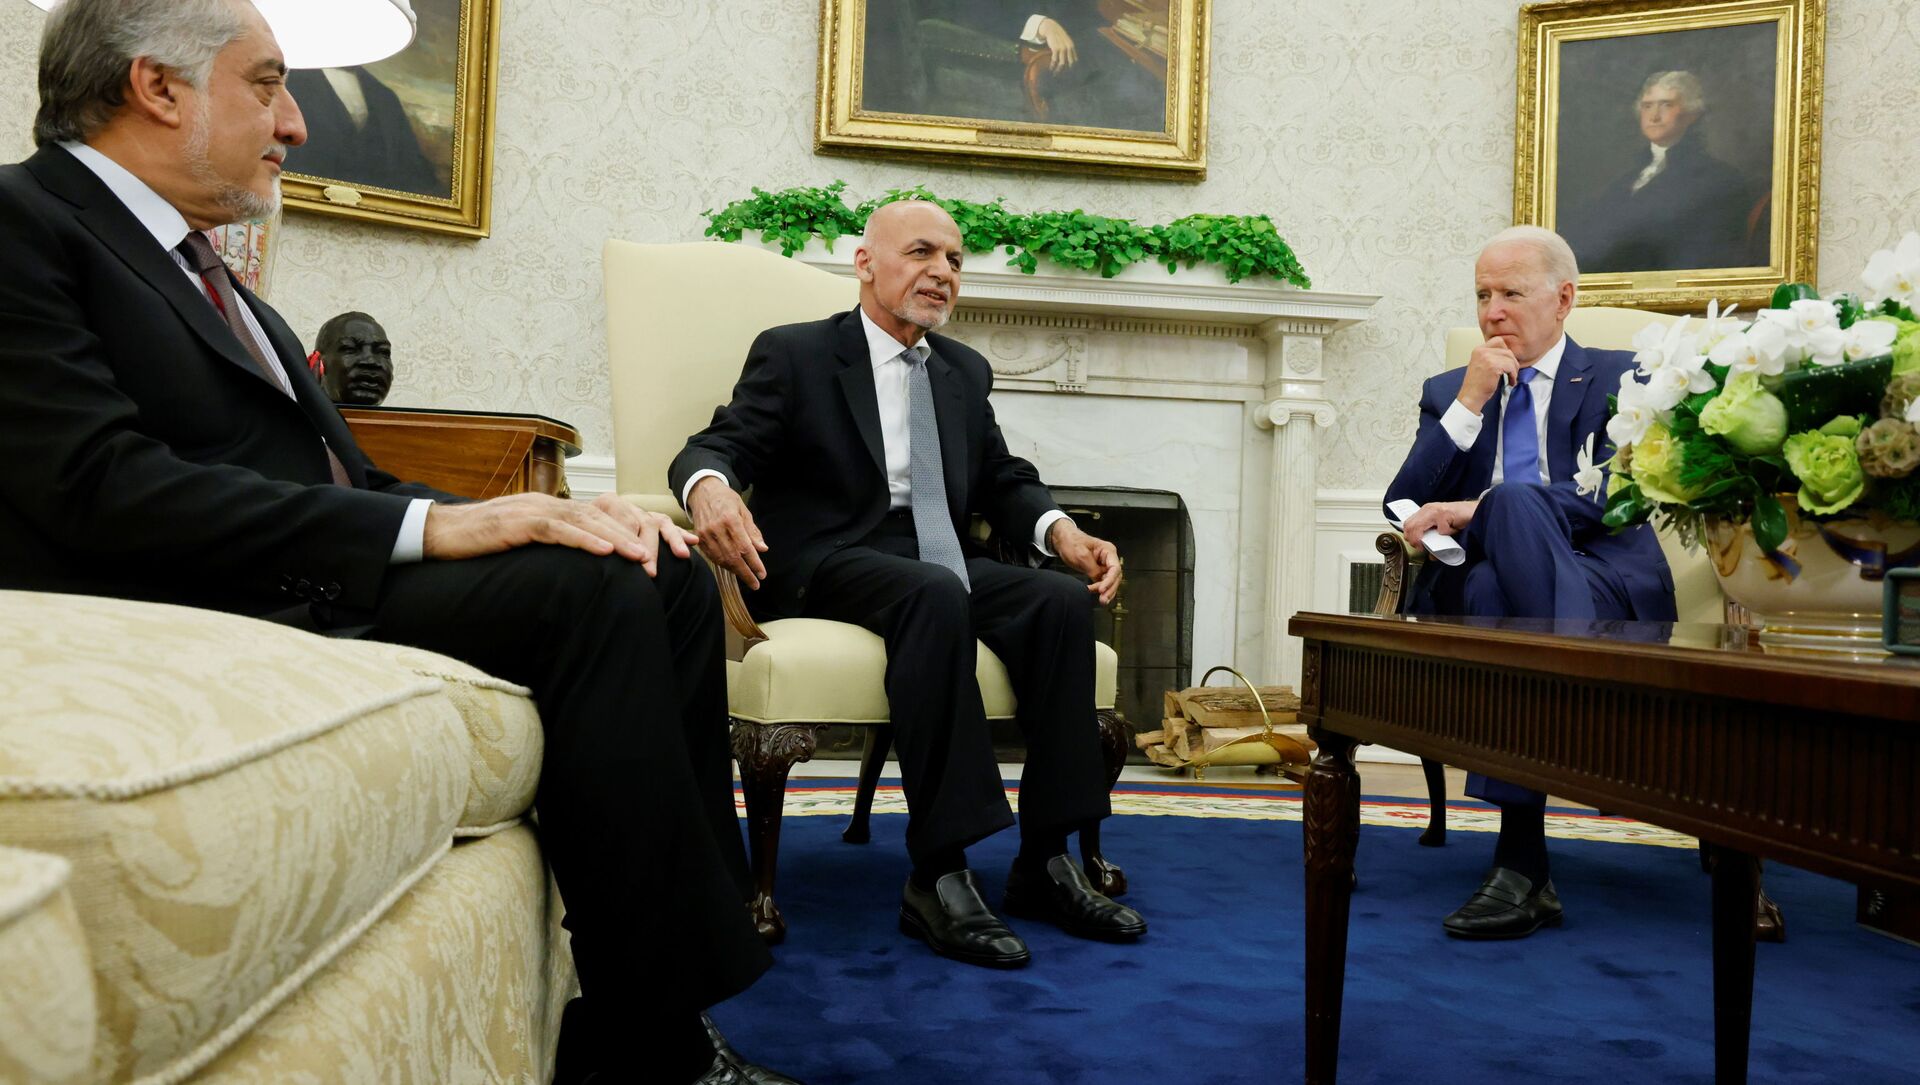 US President Joe Biden meets with Afghan President Ashraf Ghani and Chairman of Afghanistan's High Council for National Reconciliation Abdullah Abdullah at the White House, in Washington, DC, 25 June 2021. - Sputnik International, 1920, 23.07.2021